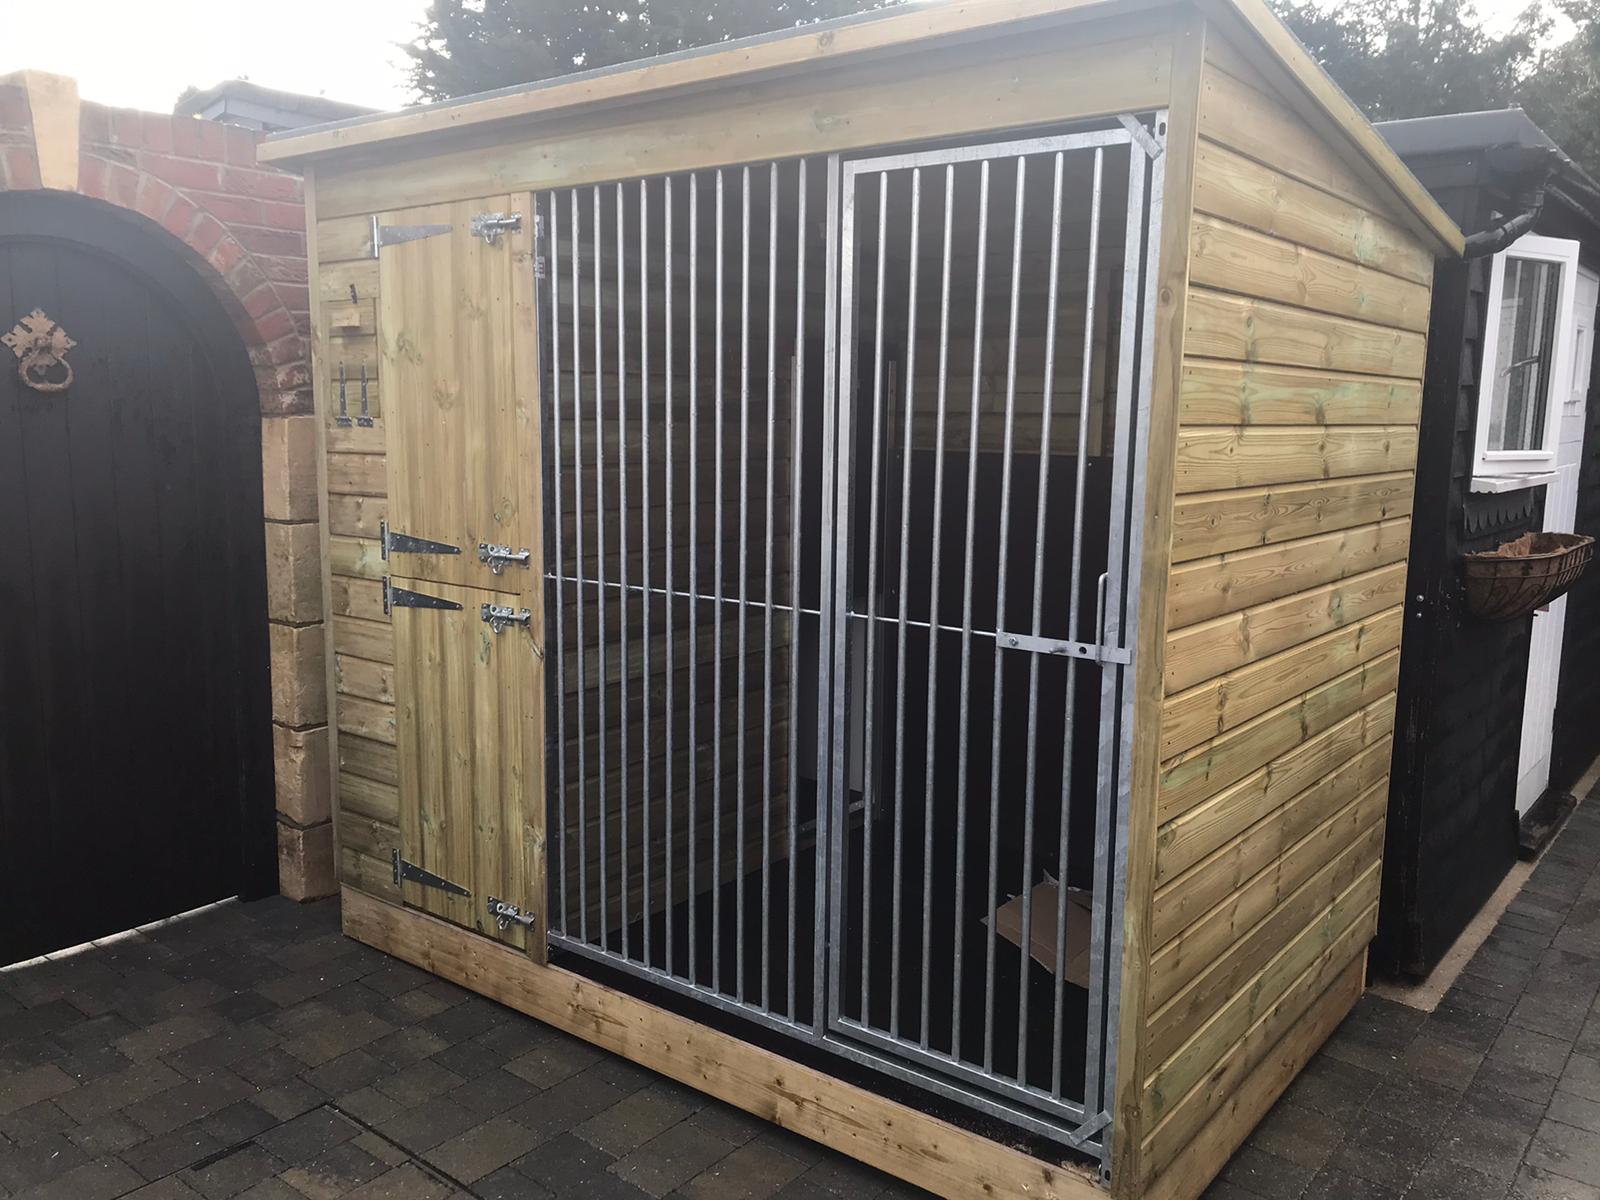 Stapeley Dog Kennel 12ft (wide) x 5ft (deep) x 6'6ft (high)